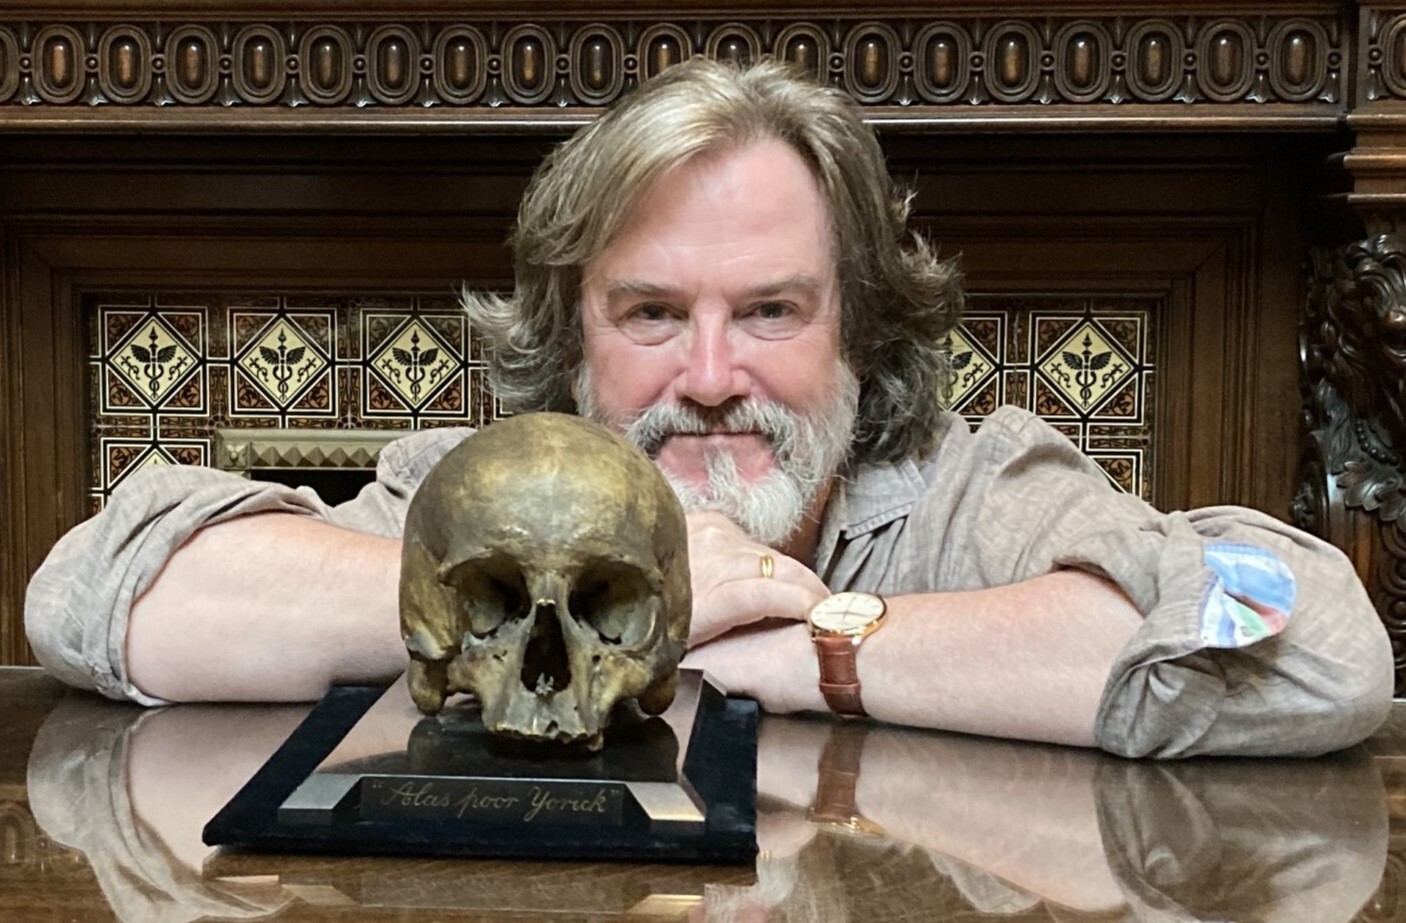 Gregory Doran, a man with medium length brown hair and a grey beard, rests his forearms on a desk in front of him. There is a skull on the desk with the words "Alas, poor Yorick" engraved on the front of the base.